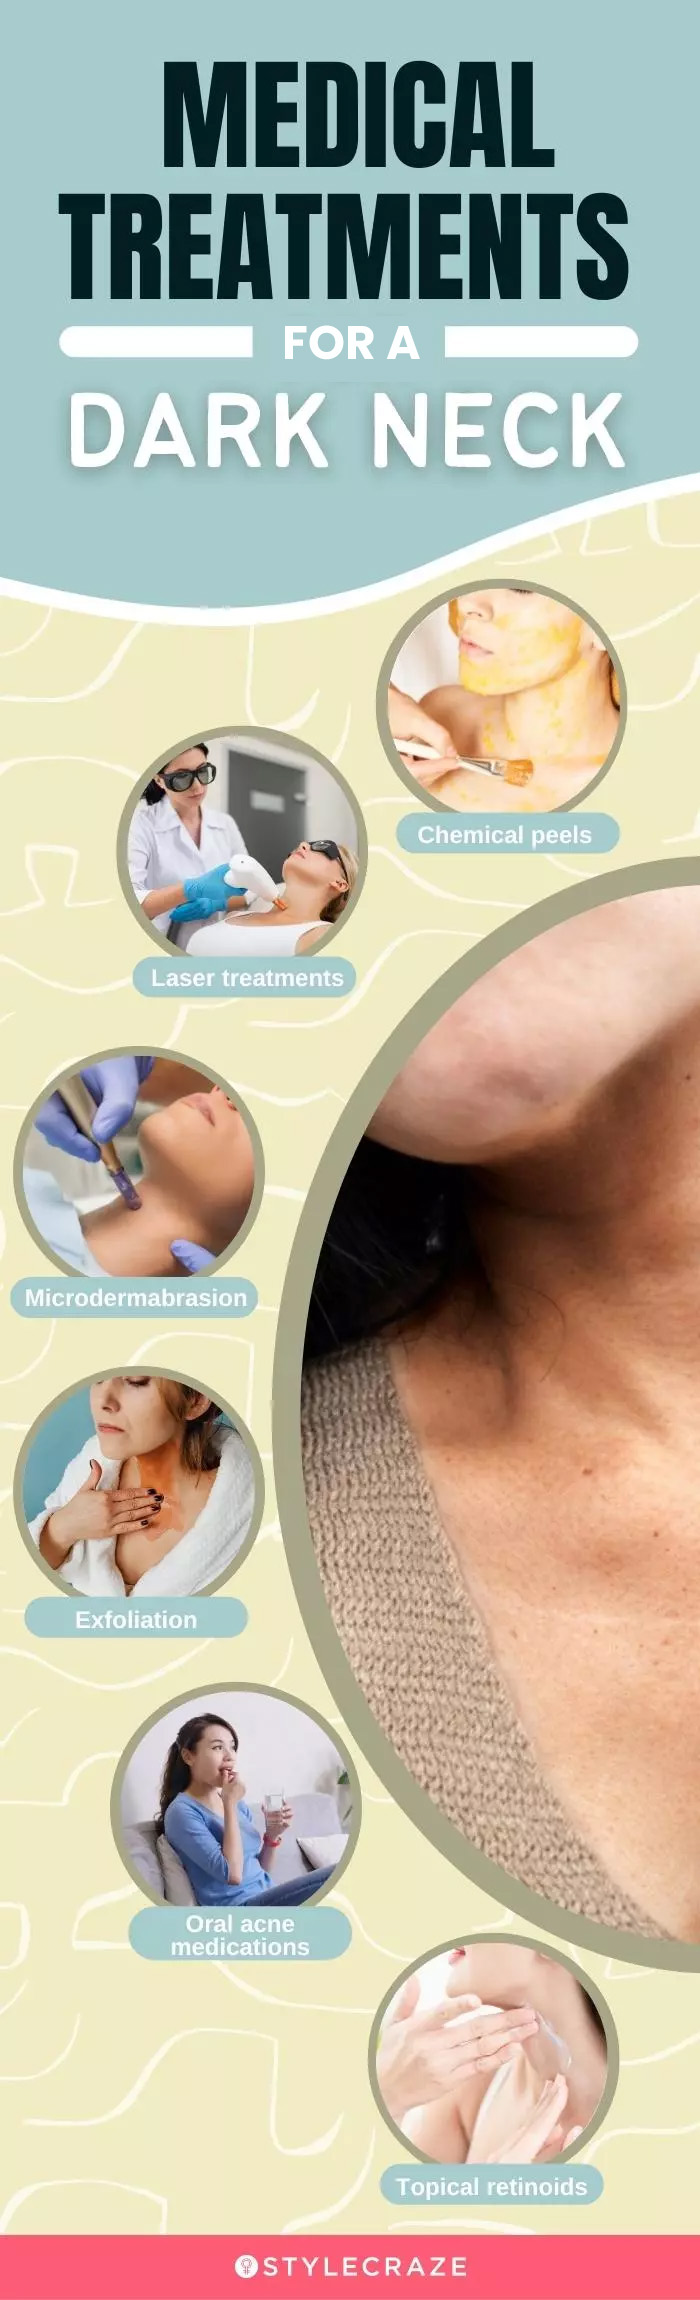 medical treatments for dark neck (infographic)